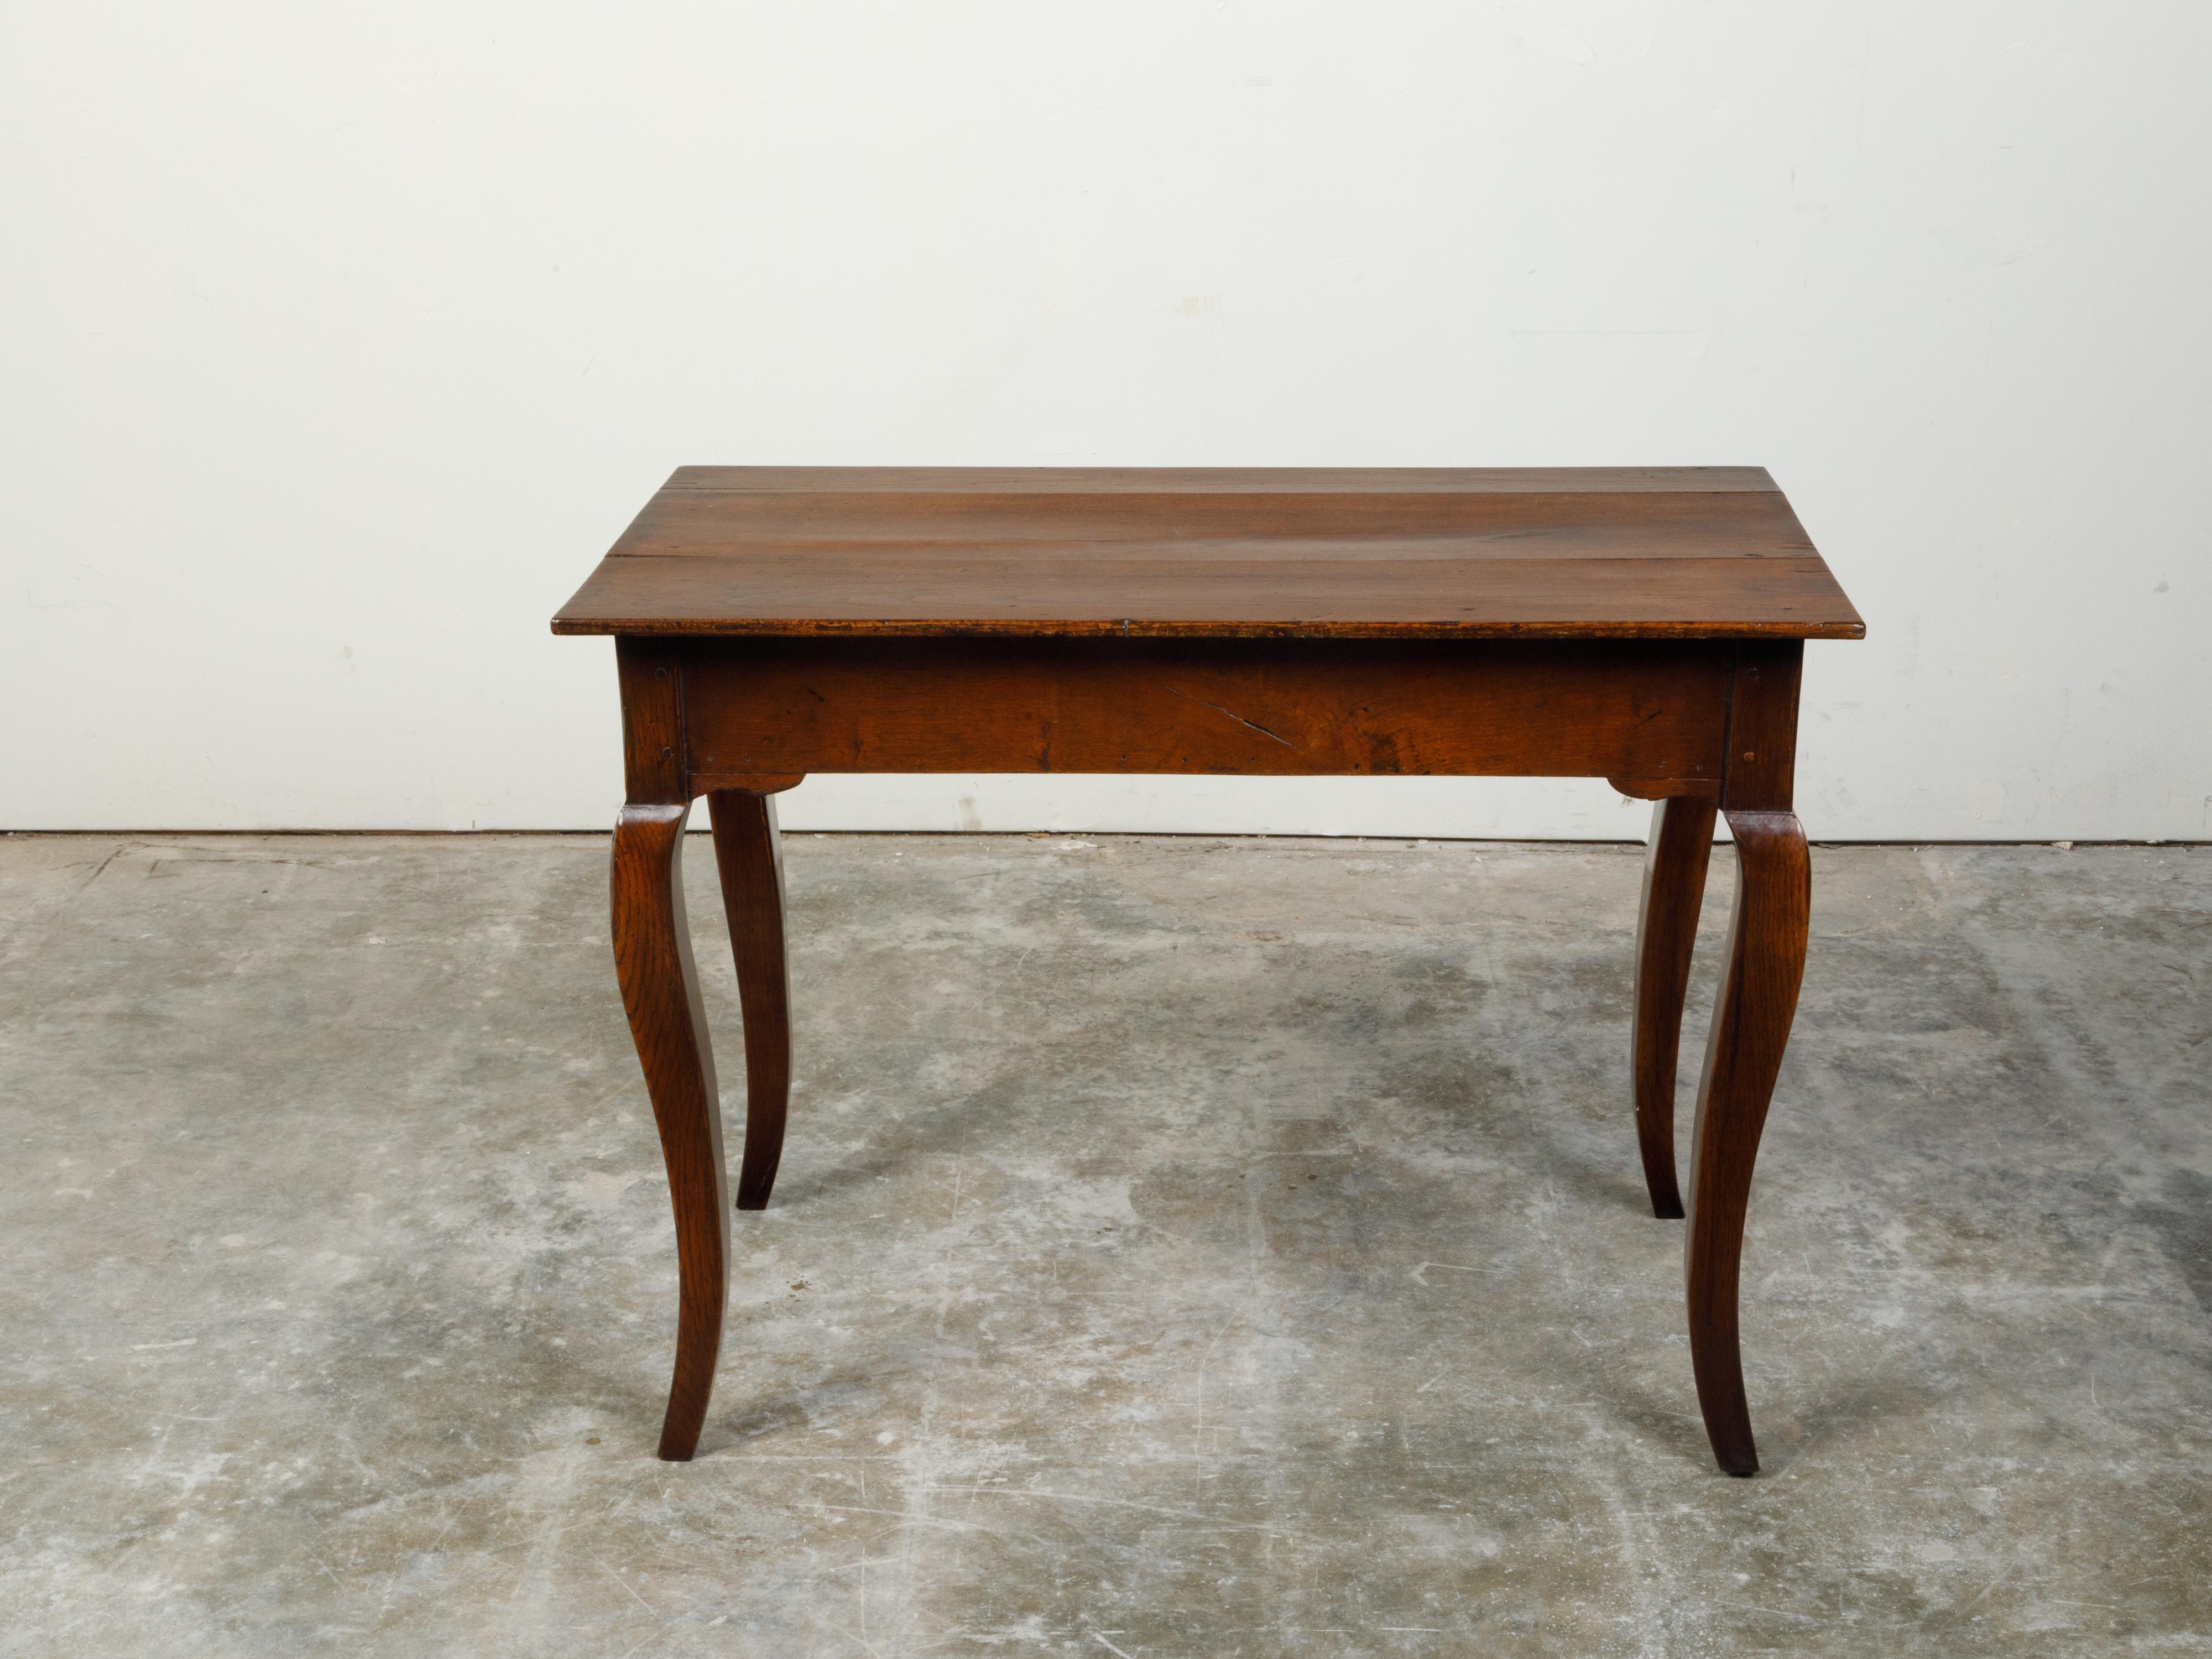 French Louis XV Style 19th Century Walnut Desk with Drawers and Cabriole Legs For Sale 3